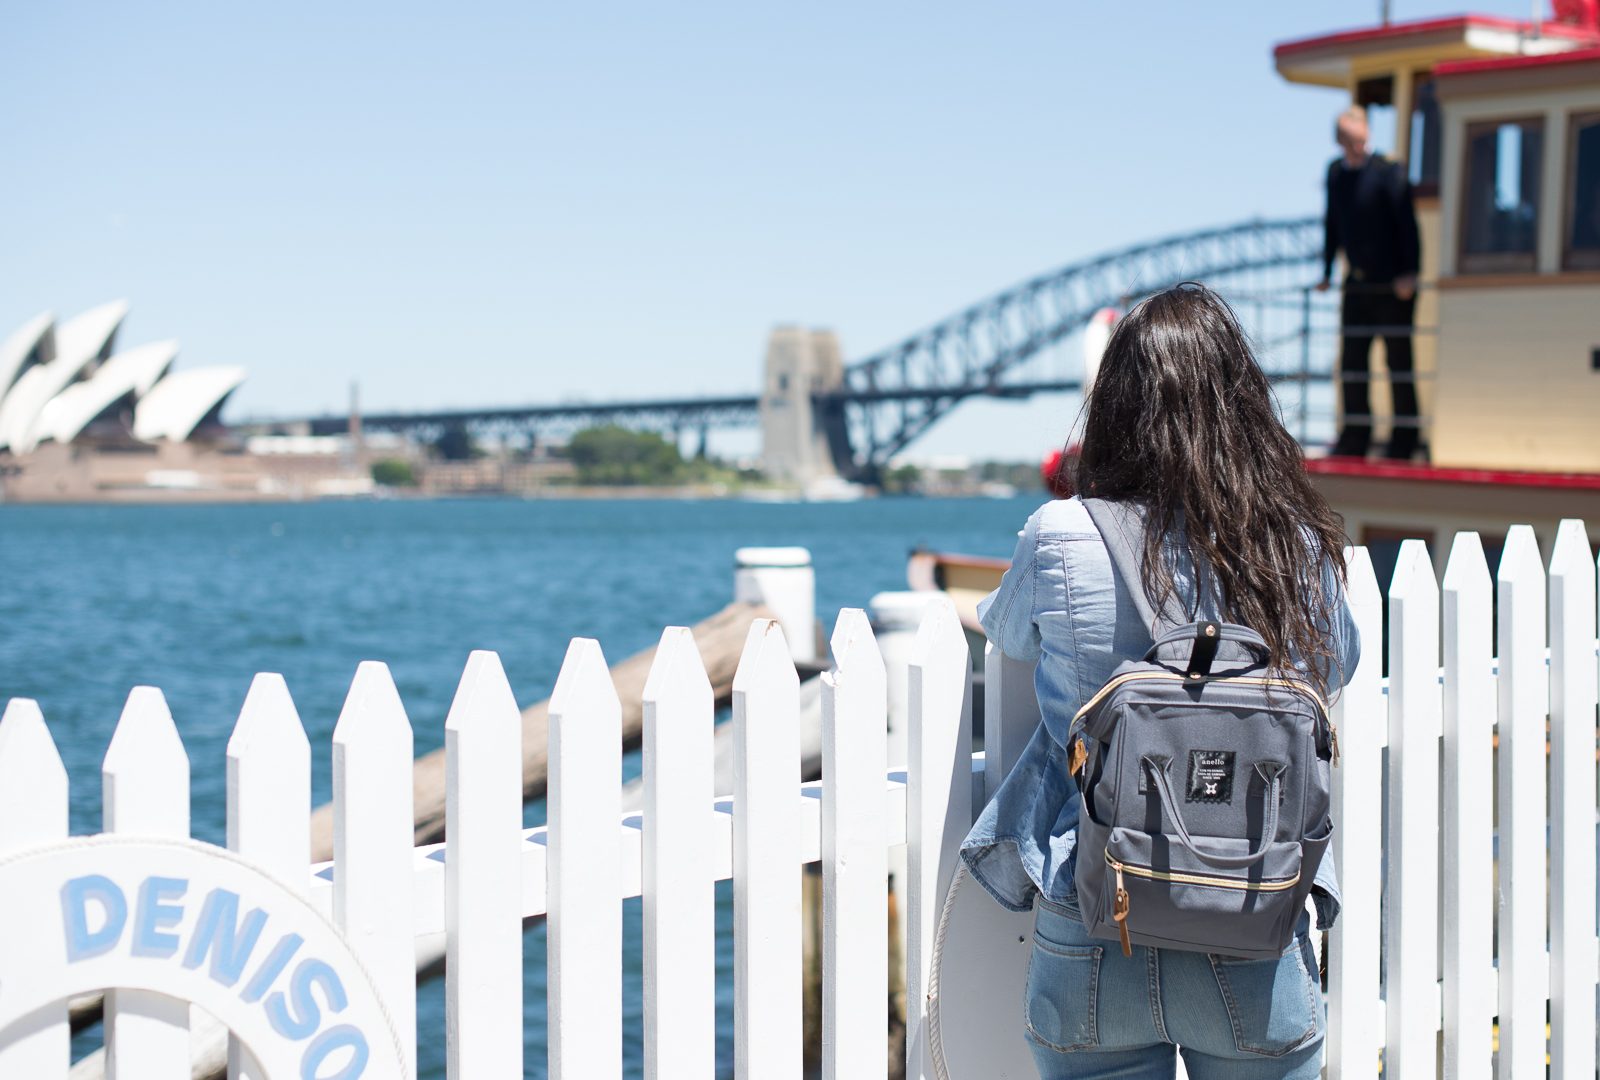 Person waiting to board a ferry at Fort Denison, Sydney Harbour National Park